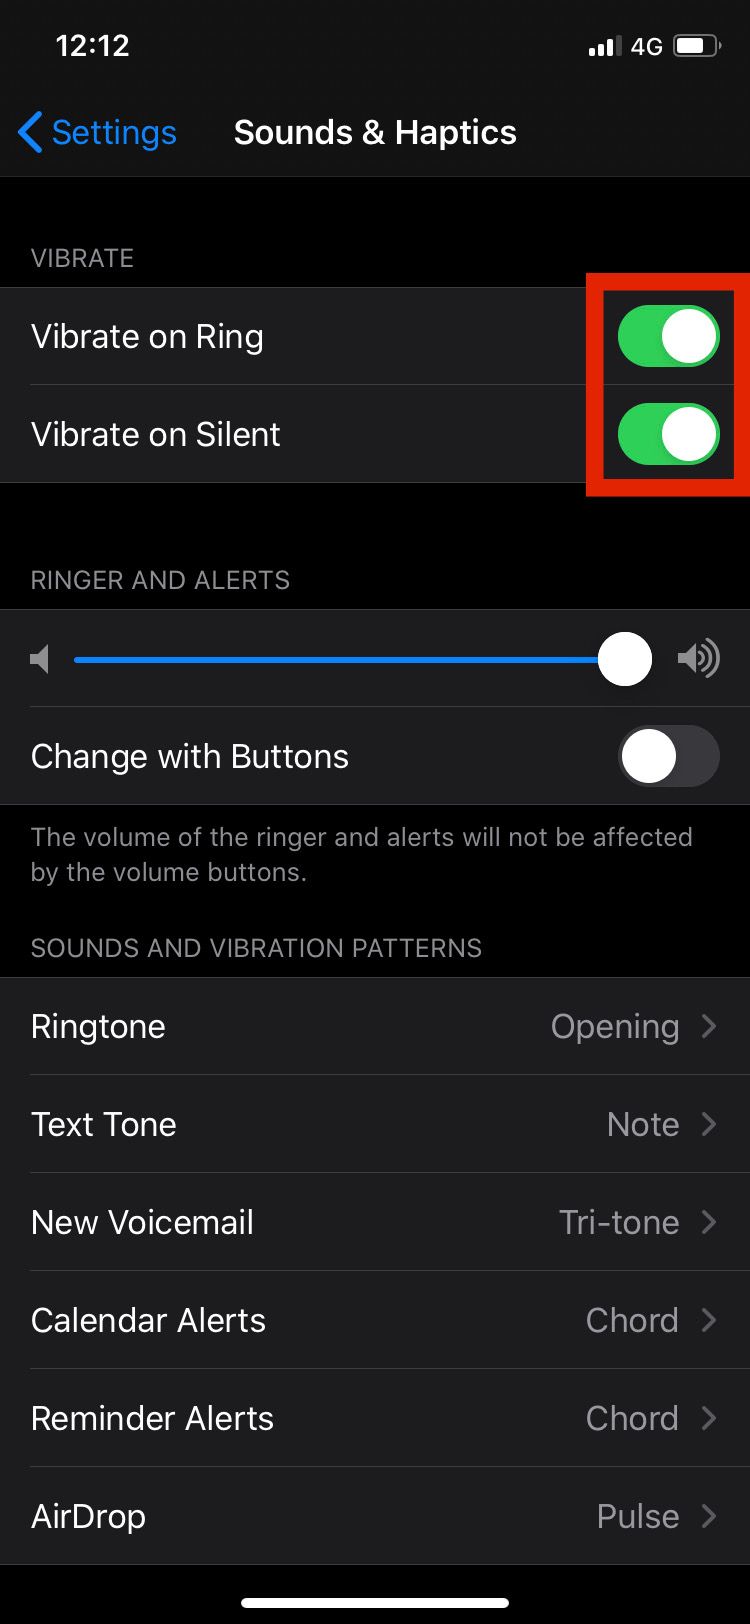 Vibrate in ring toggle